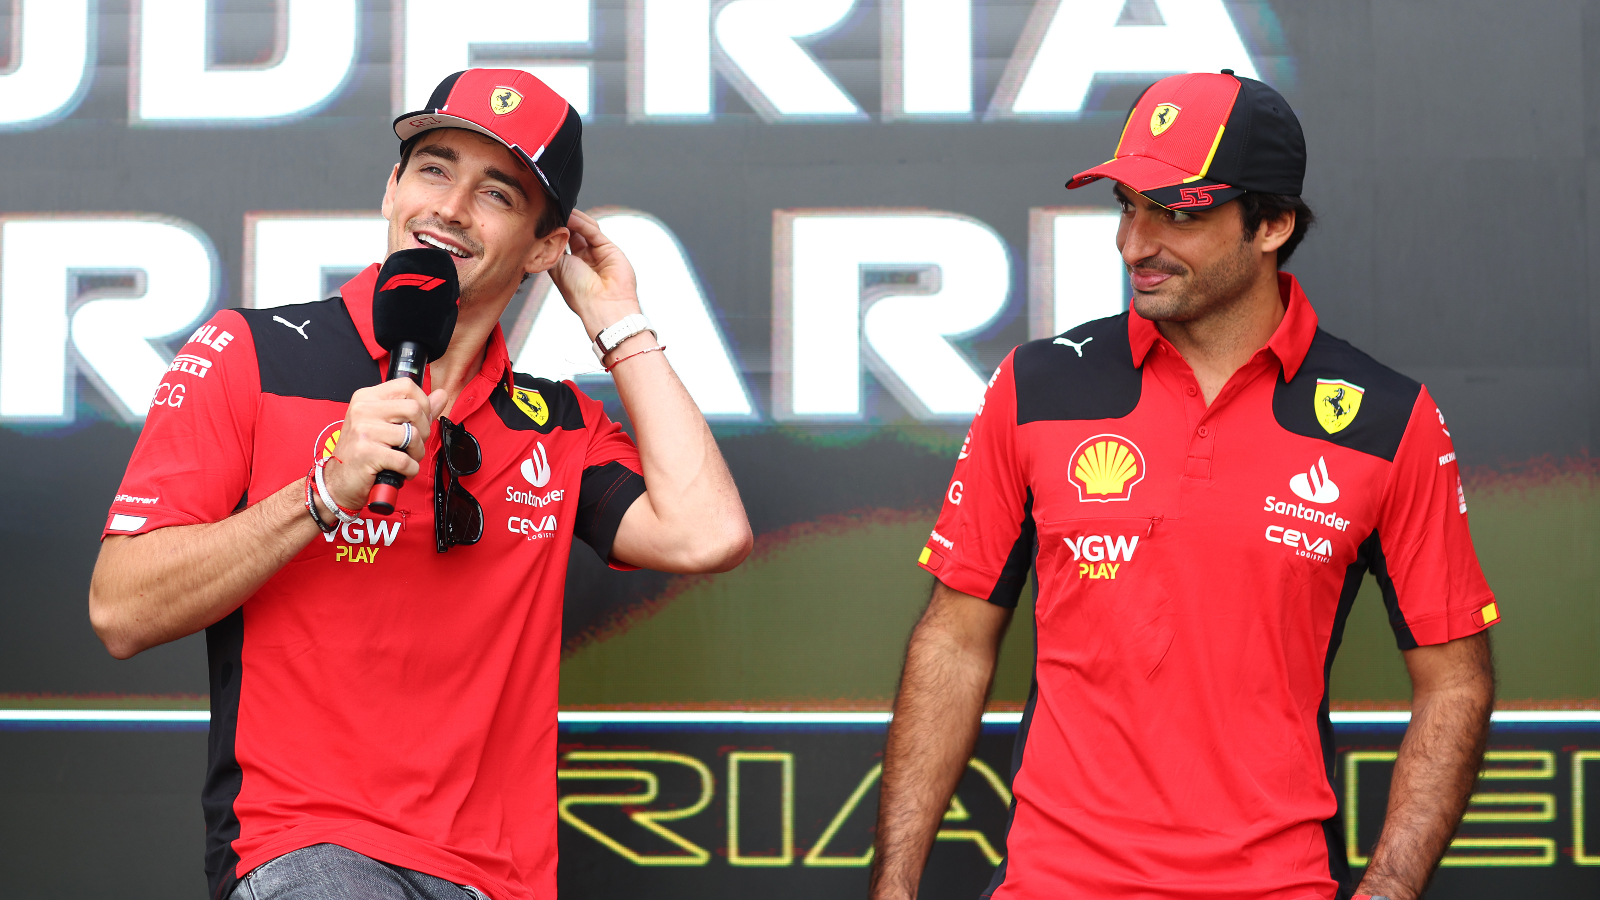 Charles Leclerc and Ferrari agree to long-term contract extension